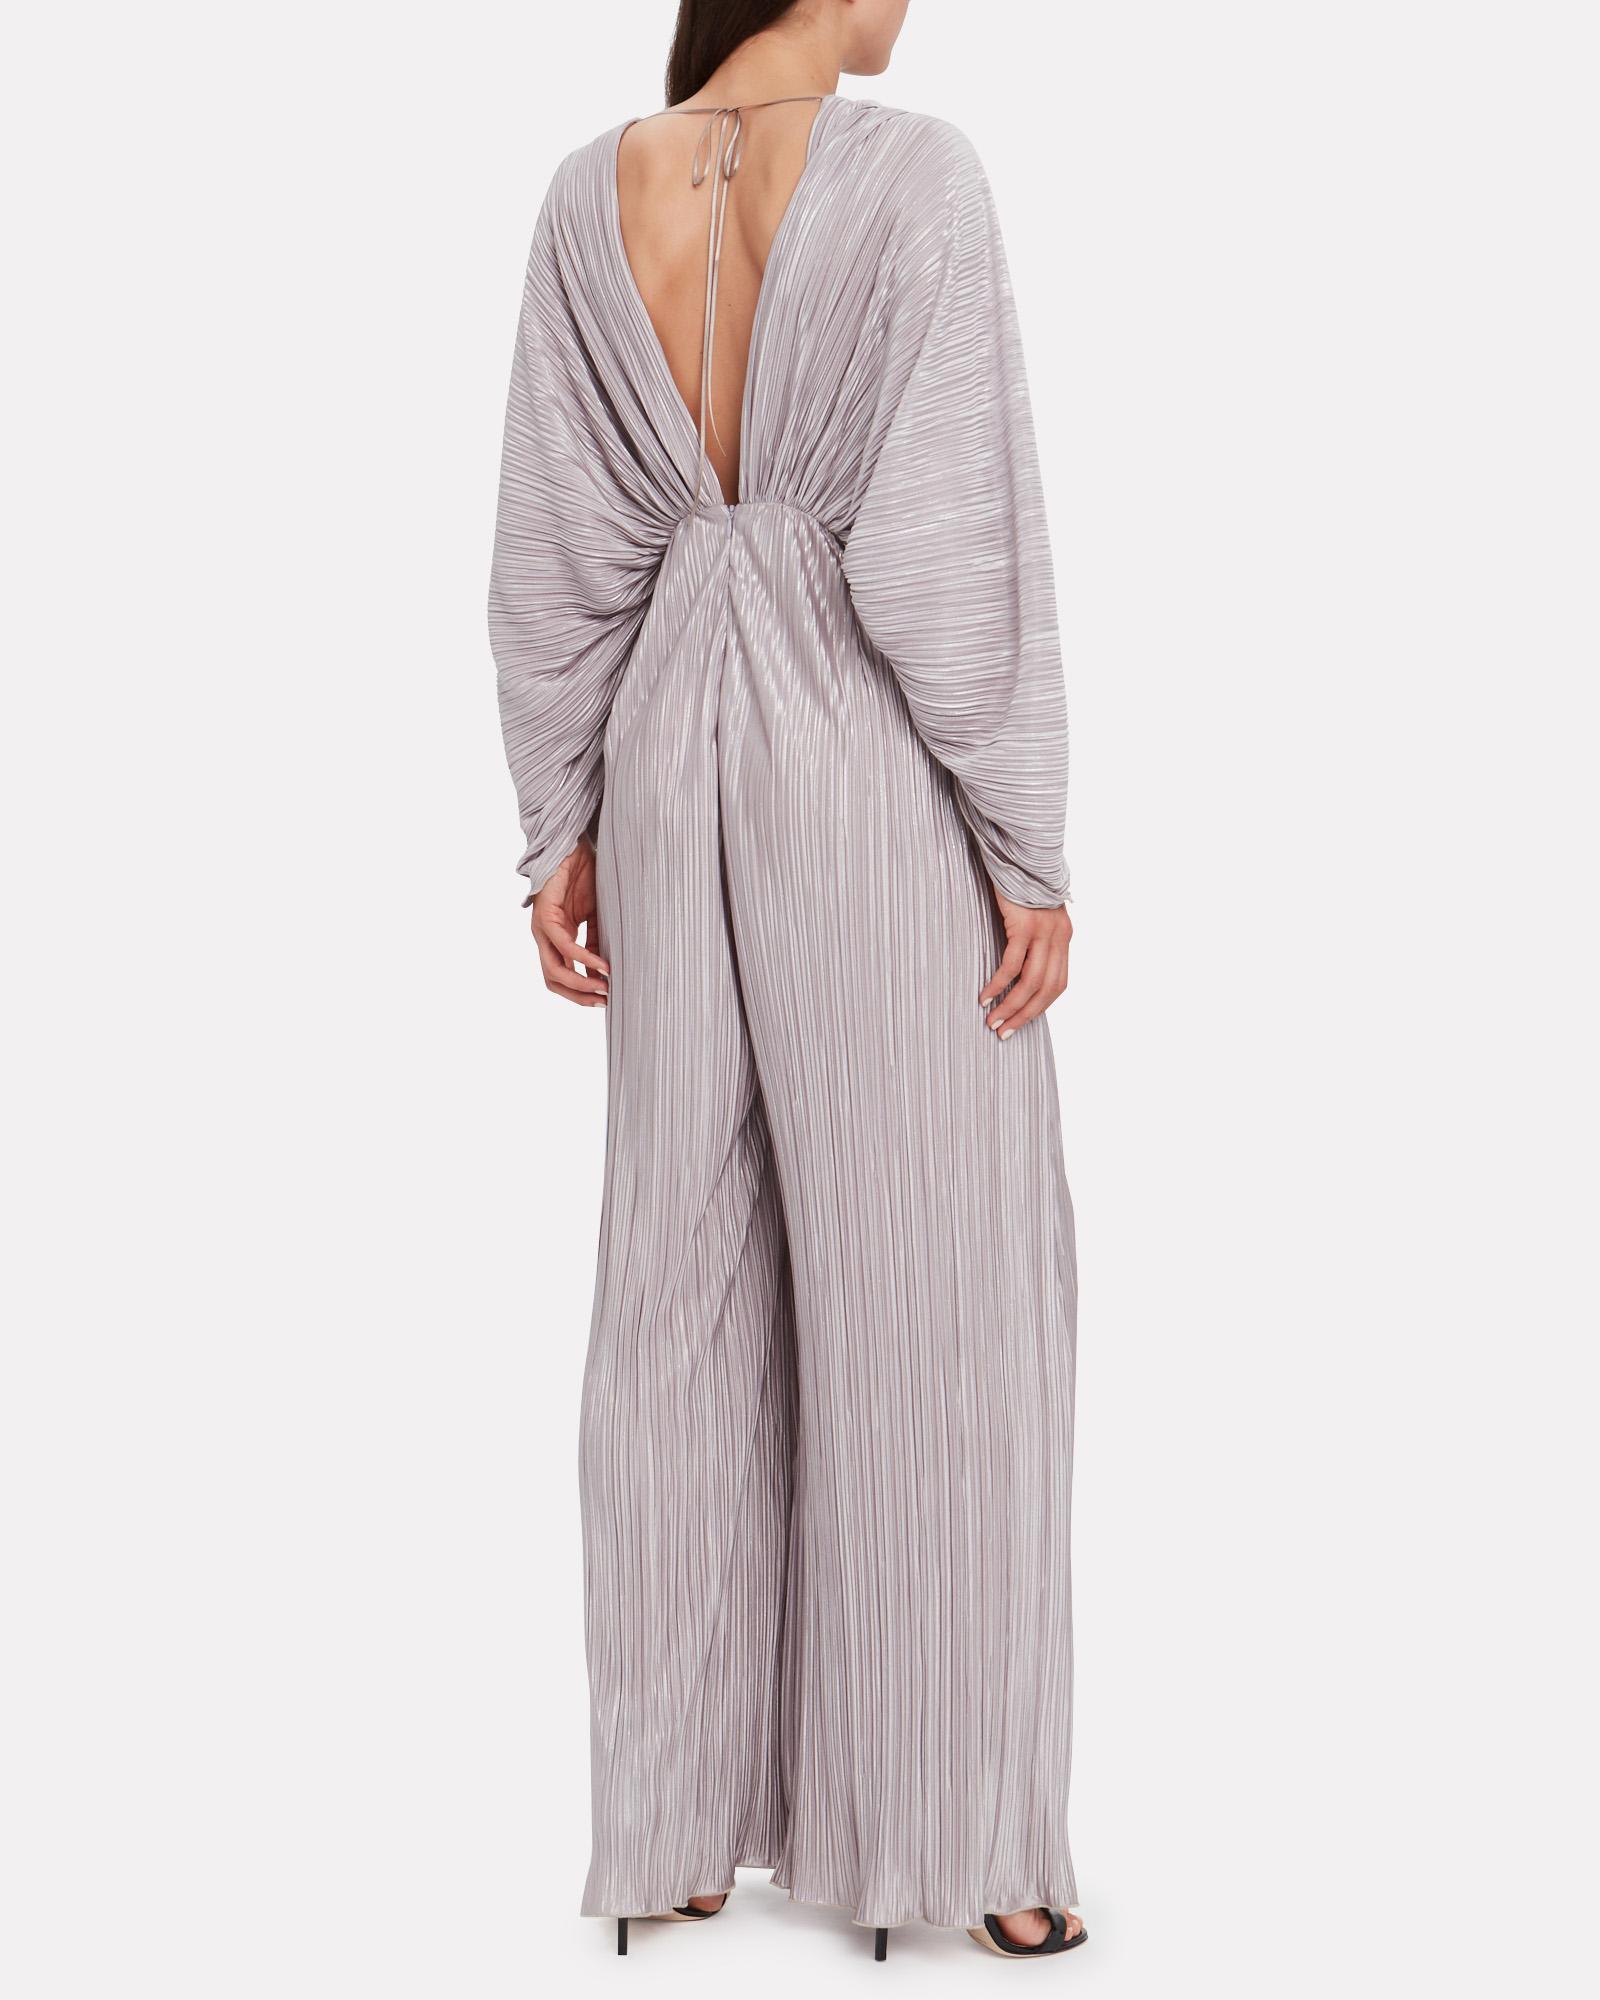 ROTATE BIRGER CHRISTENSEN Synthetic No. 46 Raindrops Pleated Jumpsuit in  Silver (Metallic) - Lyst